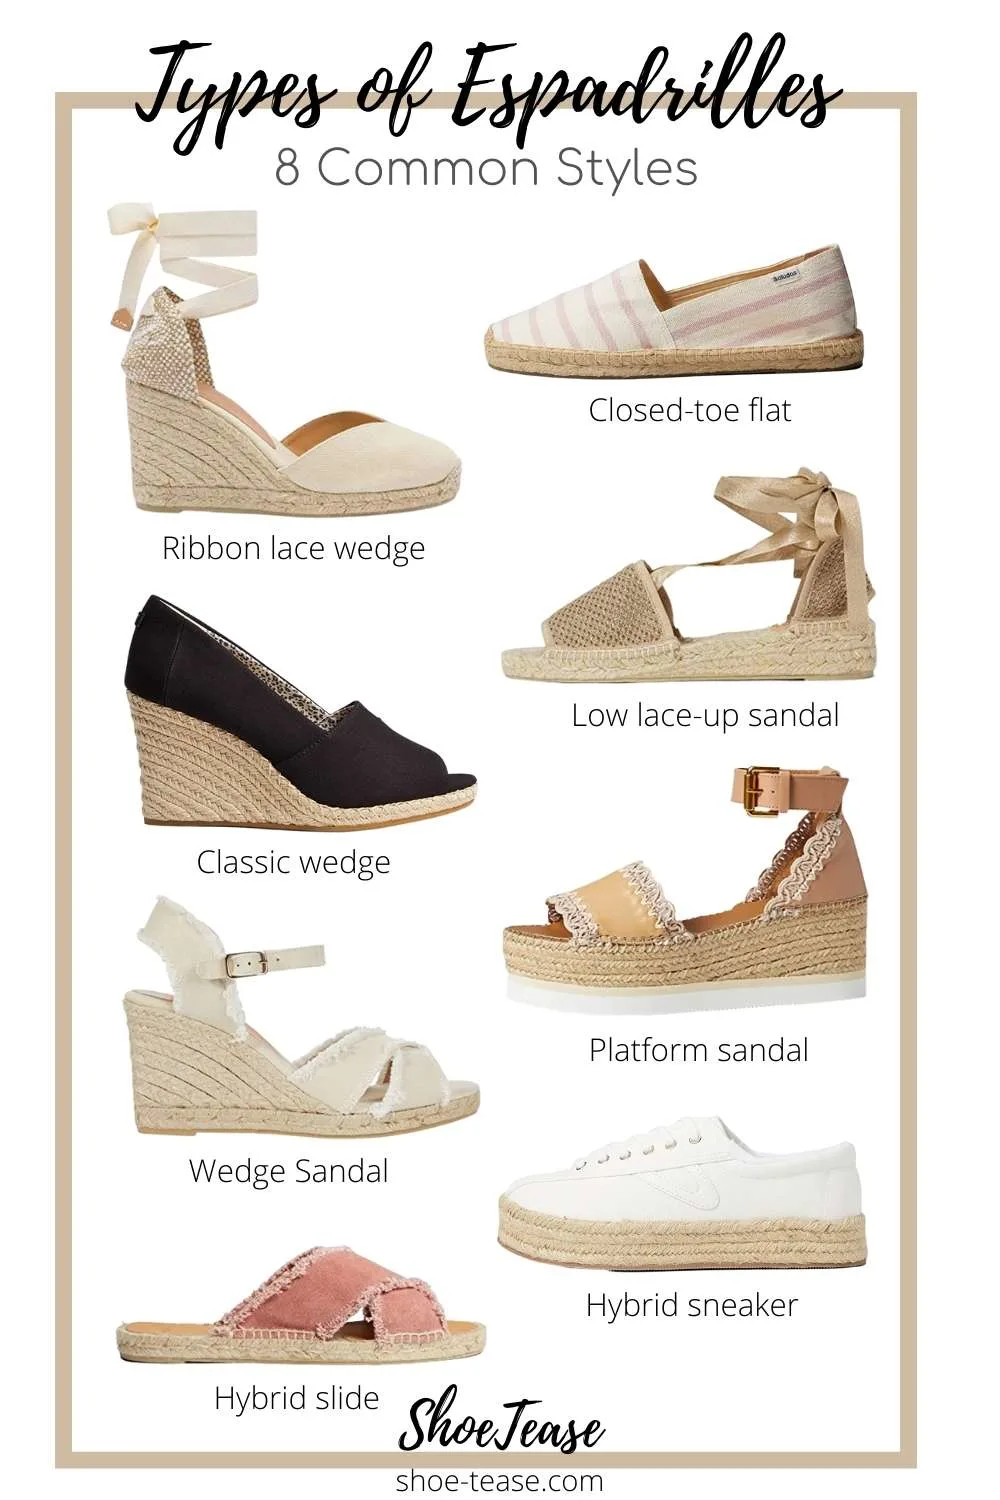 Collage of 8 different types of espadrilles for women,